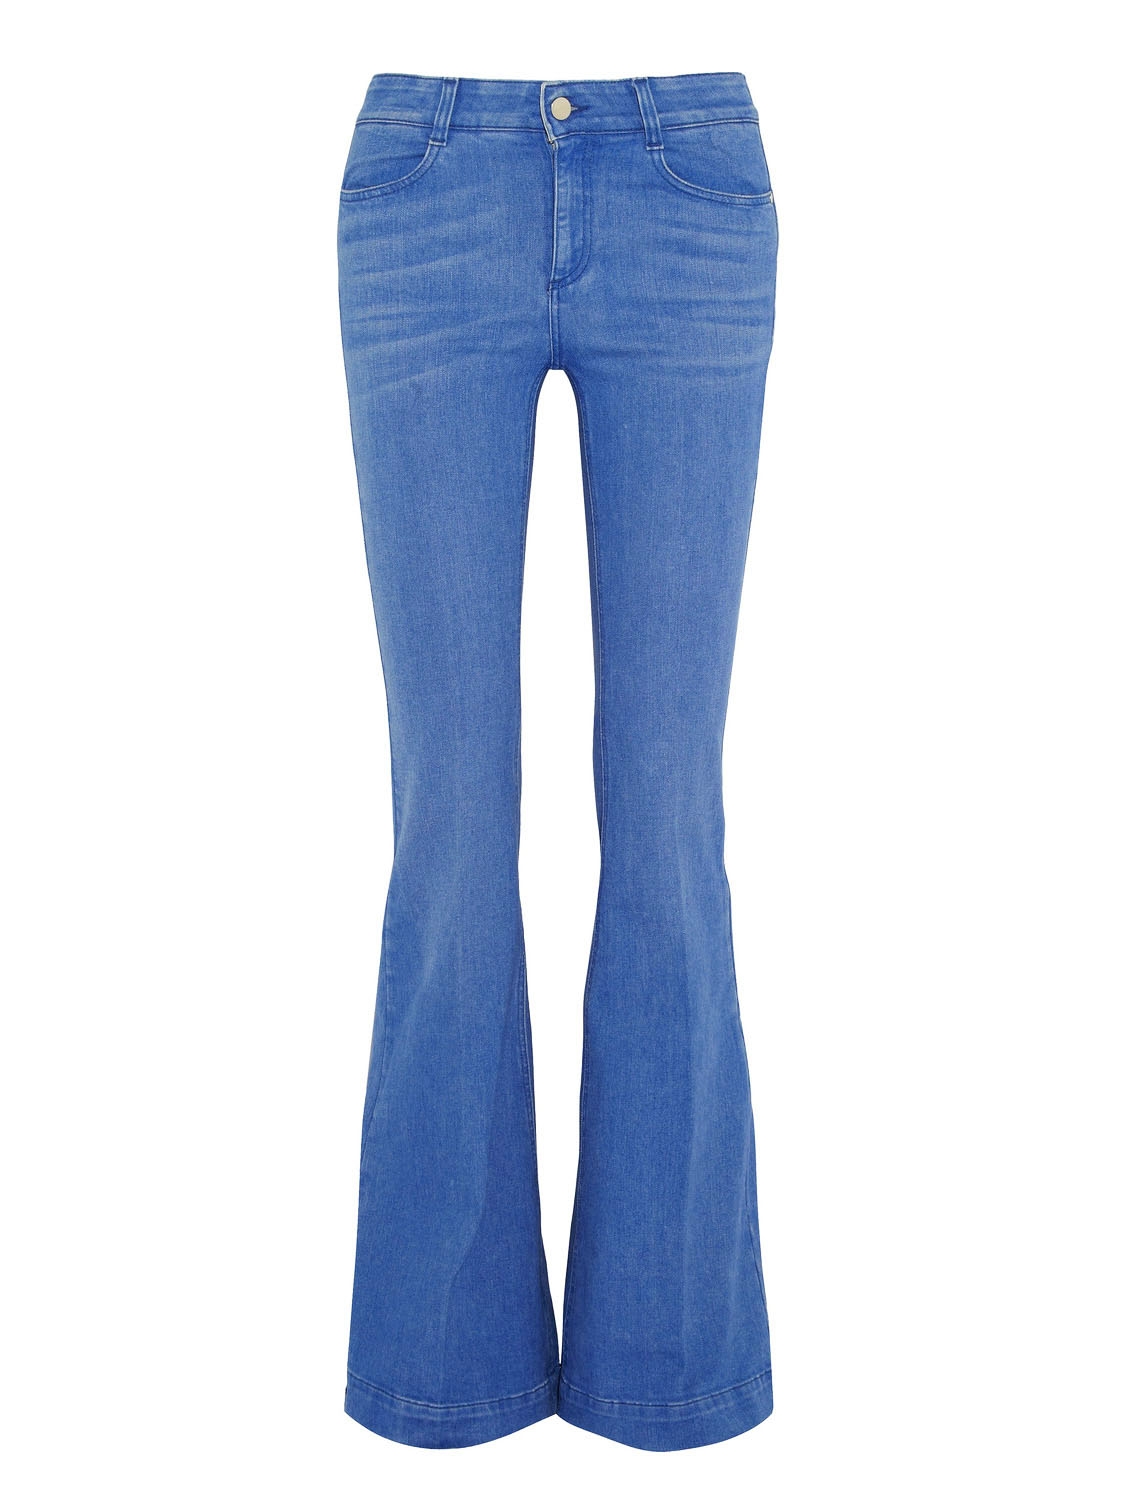 Boutique STELLA MCCARTNEY Light blue high-rise flared jeans Retail